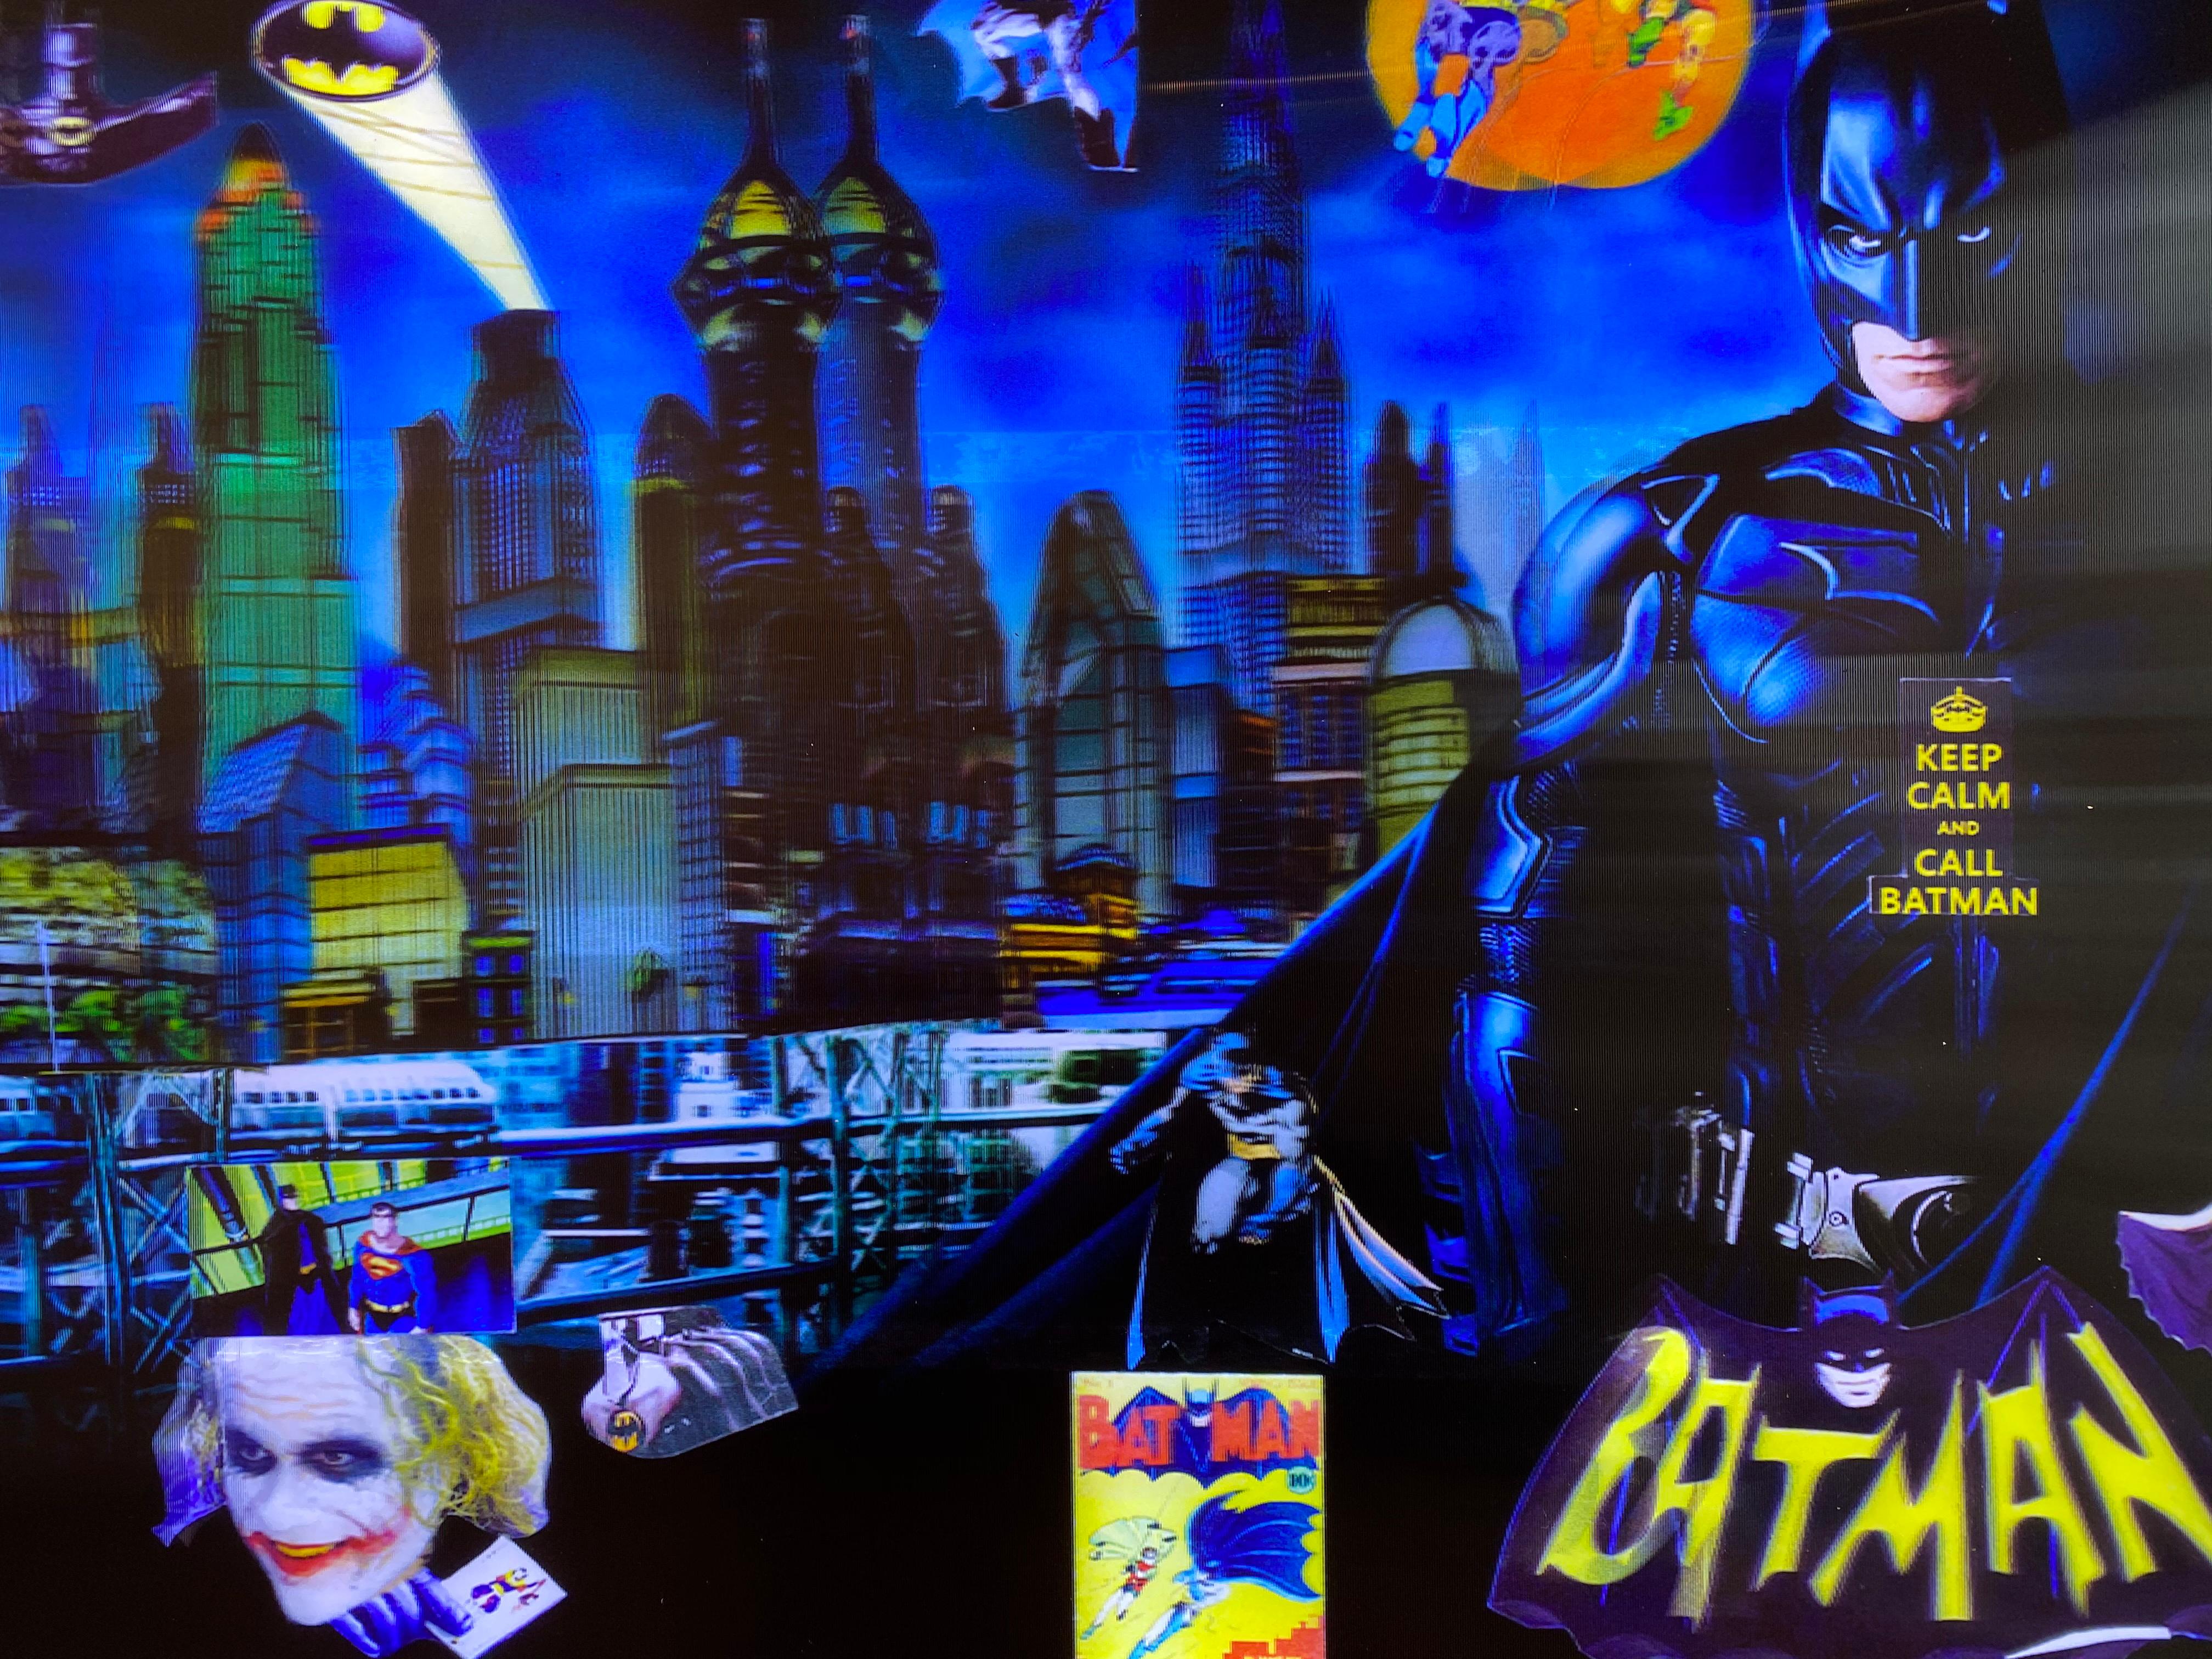 'Batman in Gotham' by DJ Leon, 2015. The piece measures 28 x 45 inches, Ed. of 10.  This 3D backlit print incorporates images and text found in batman comics. Embedded LEDs are placed behind the digital print to reveal three-dimensional images as